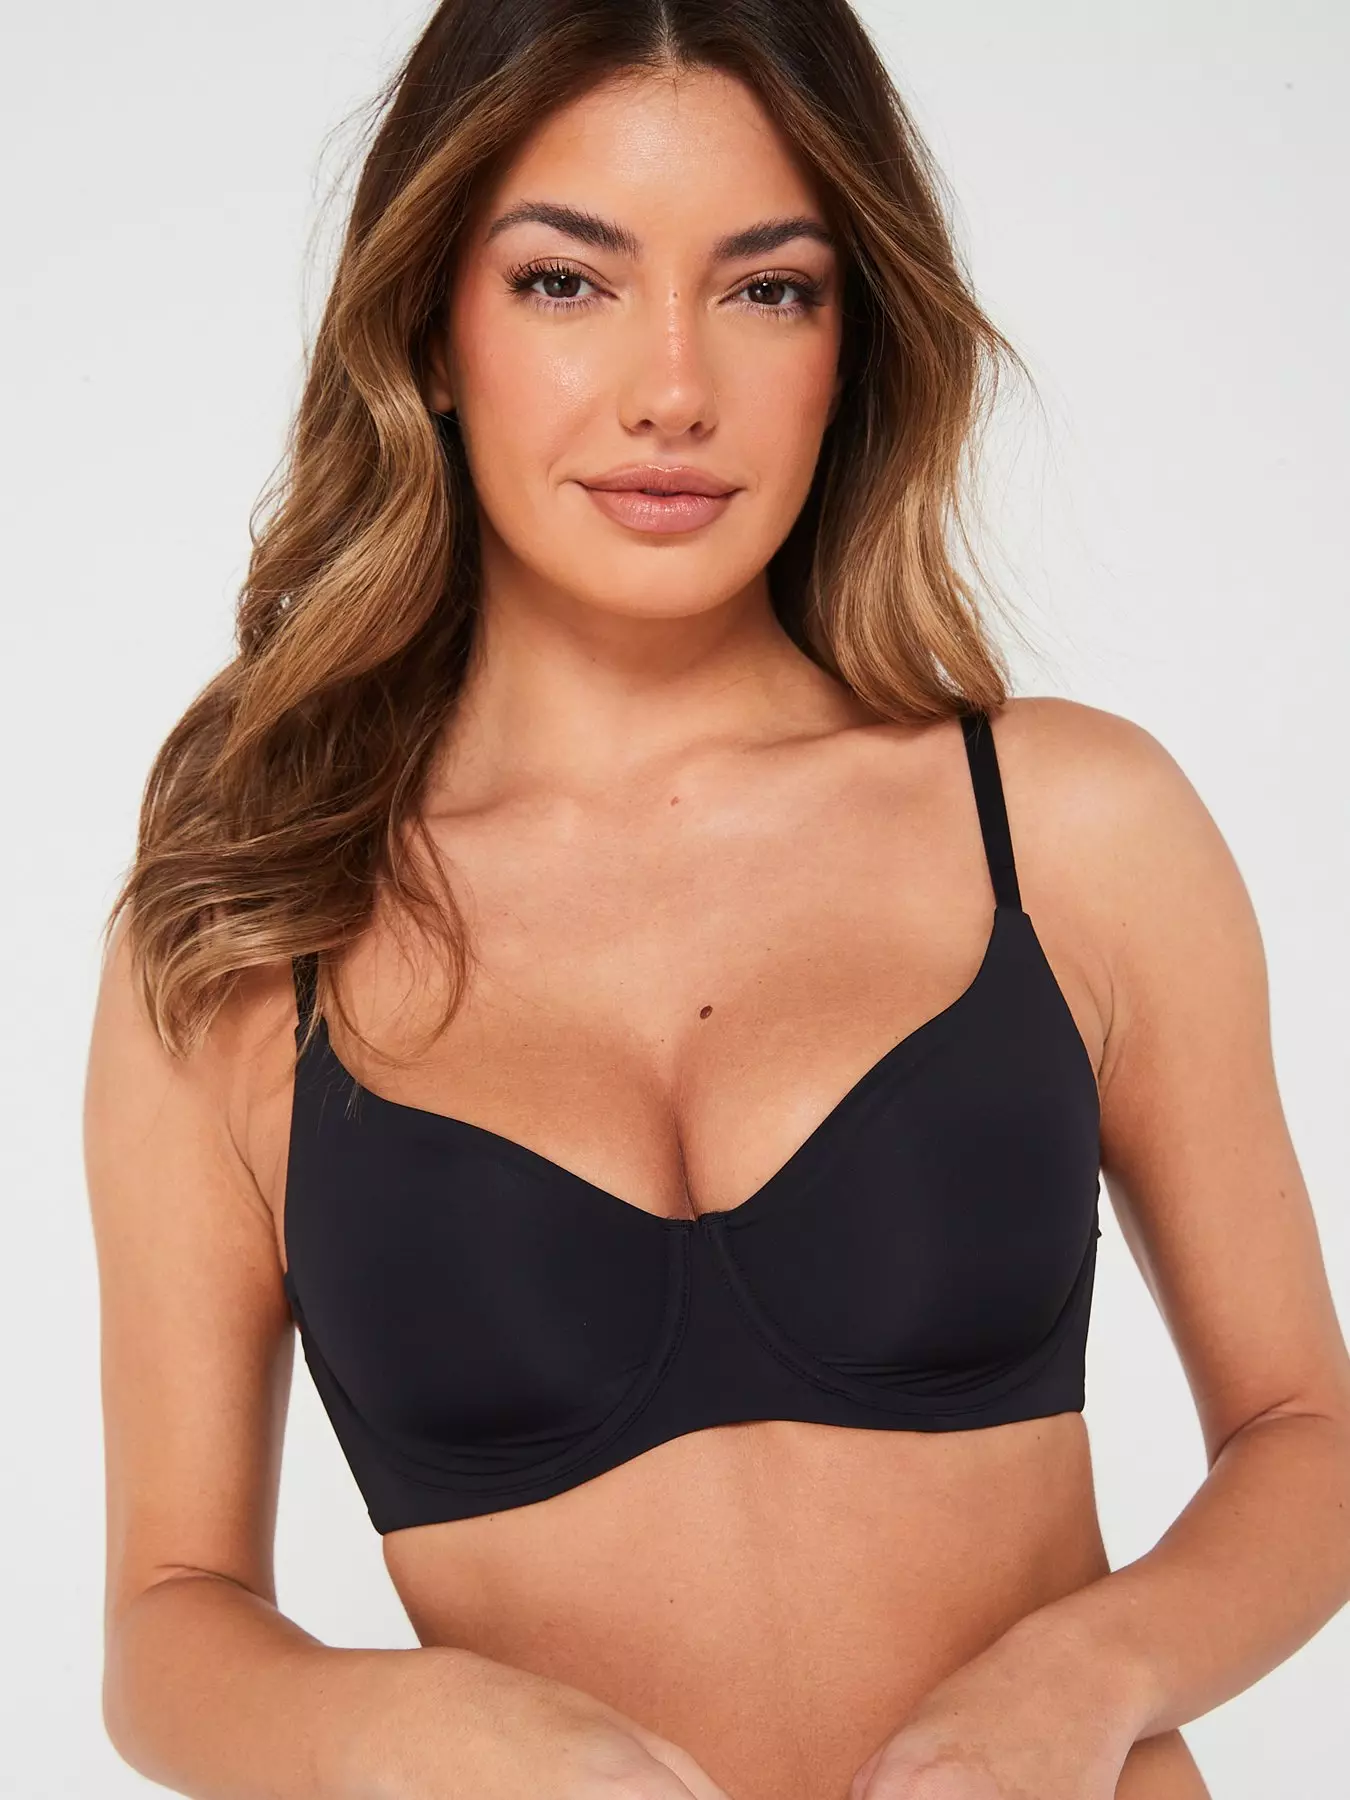 Black Bra, 36C Size 36 C - $15 New With Tags - From Lindys